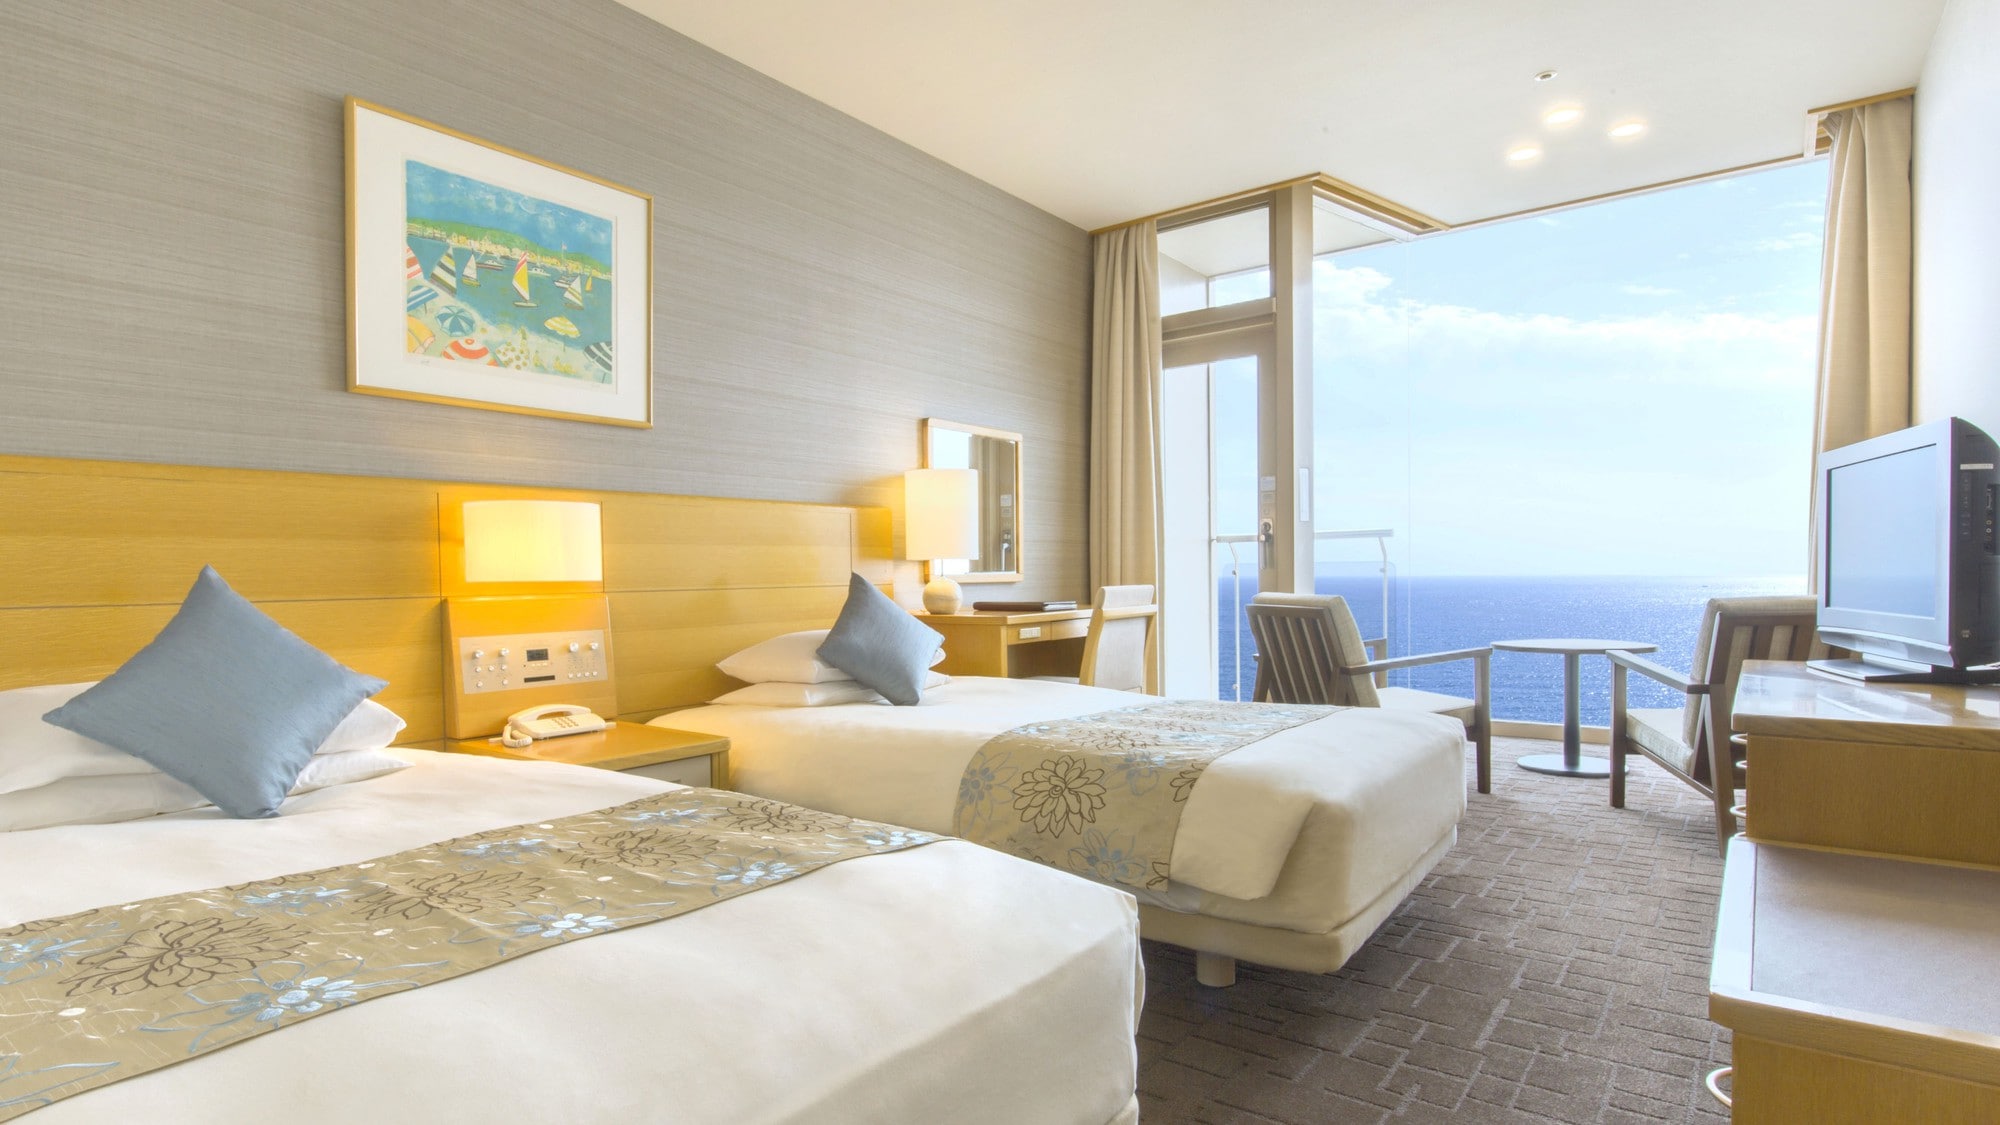 Twin Room B (1st or 2nd floor / 28 sqm / All rooms are non-smoking / Location overlooking Sagami Bay)